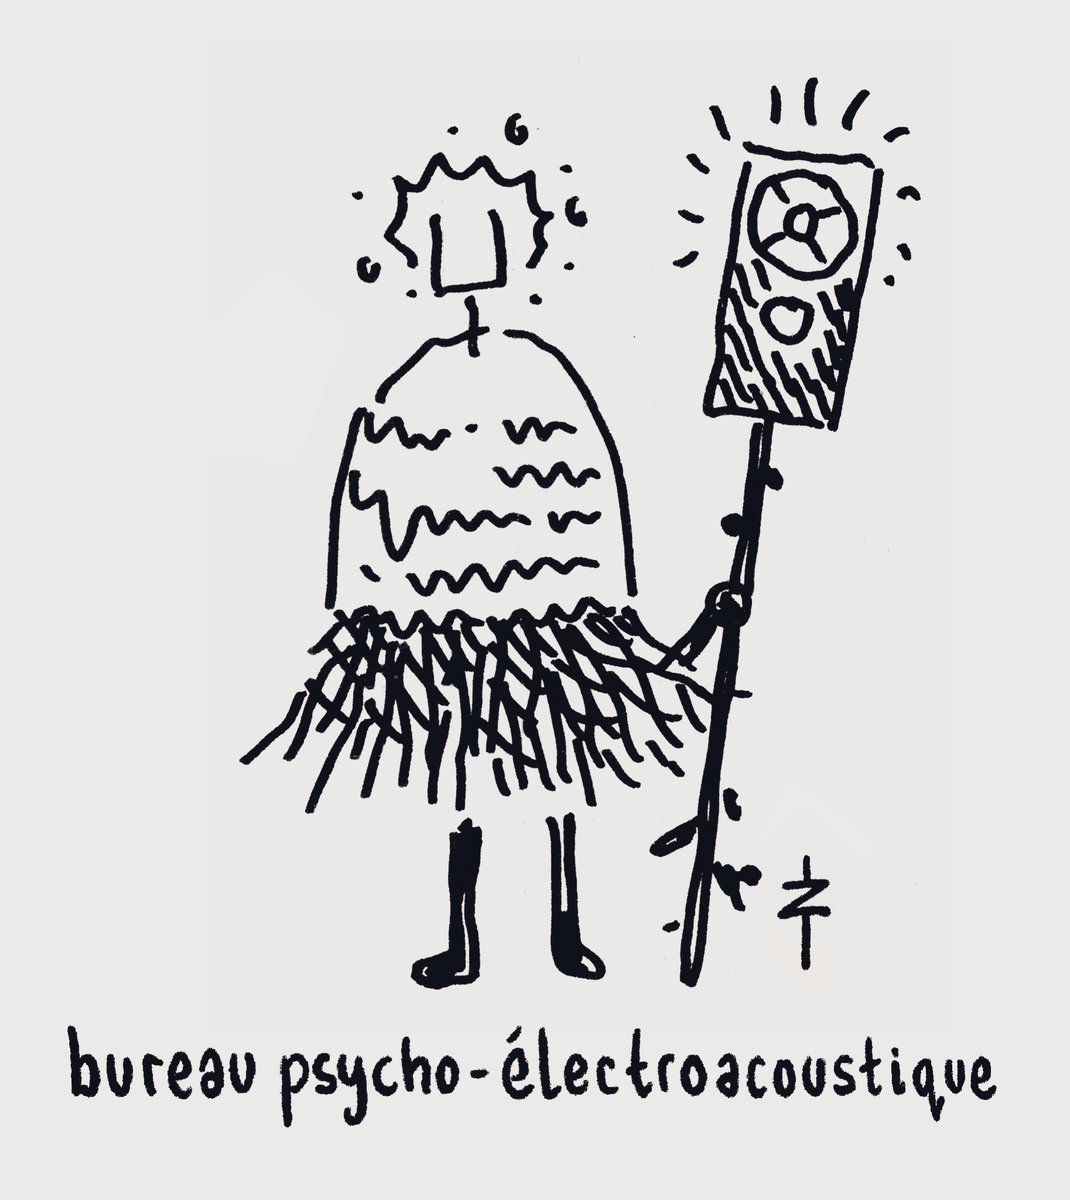 • Zeke Clough's cre-active artwork for
/|| bureau psycho-électroacoustique
#bureaupsychoélectroacoustique \| • 
• an “object” that will constantly update its contents \| stuff about #electroacousticmusic soon in my #Bandcamp •
#music #artshare #wipart #slowfi #research #wip